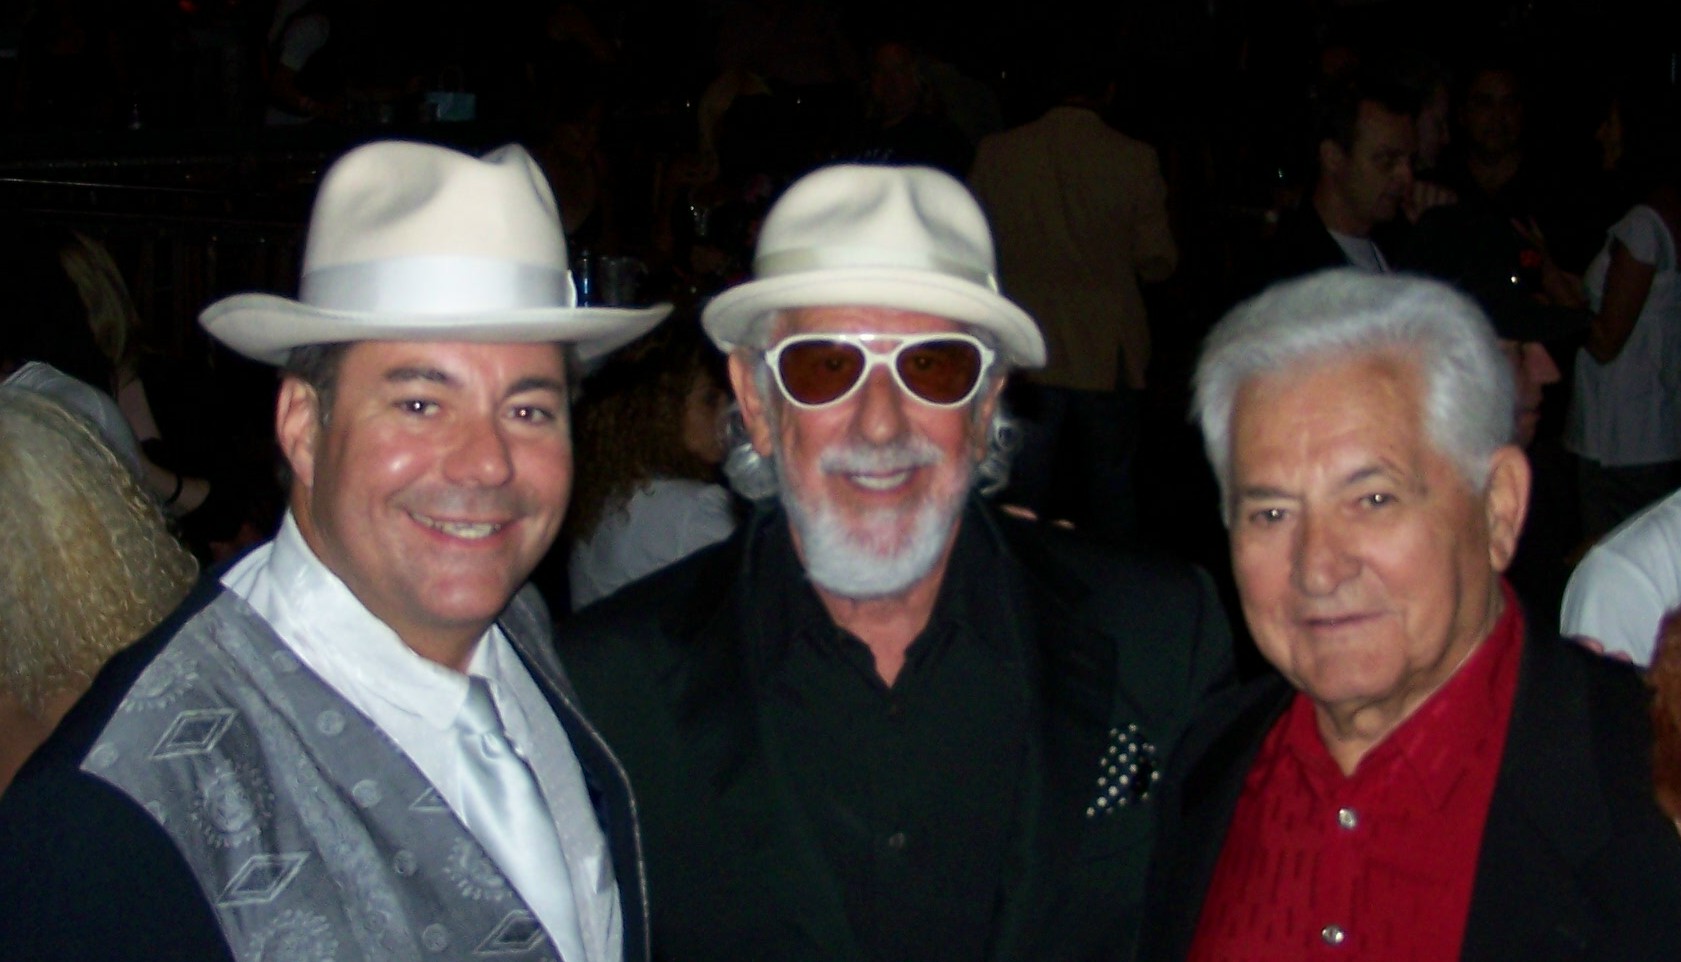 This picture has the last 3 living Godfather's of the Sunset Strip Rock n' Roll era. From L to R: Al Bowman, Lou Adler and Mario Maglieri. Feel free to google any of these names. 